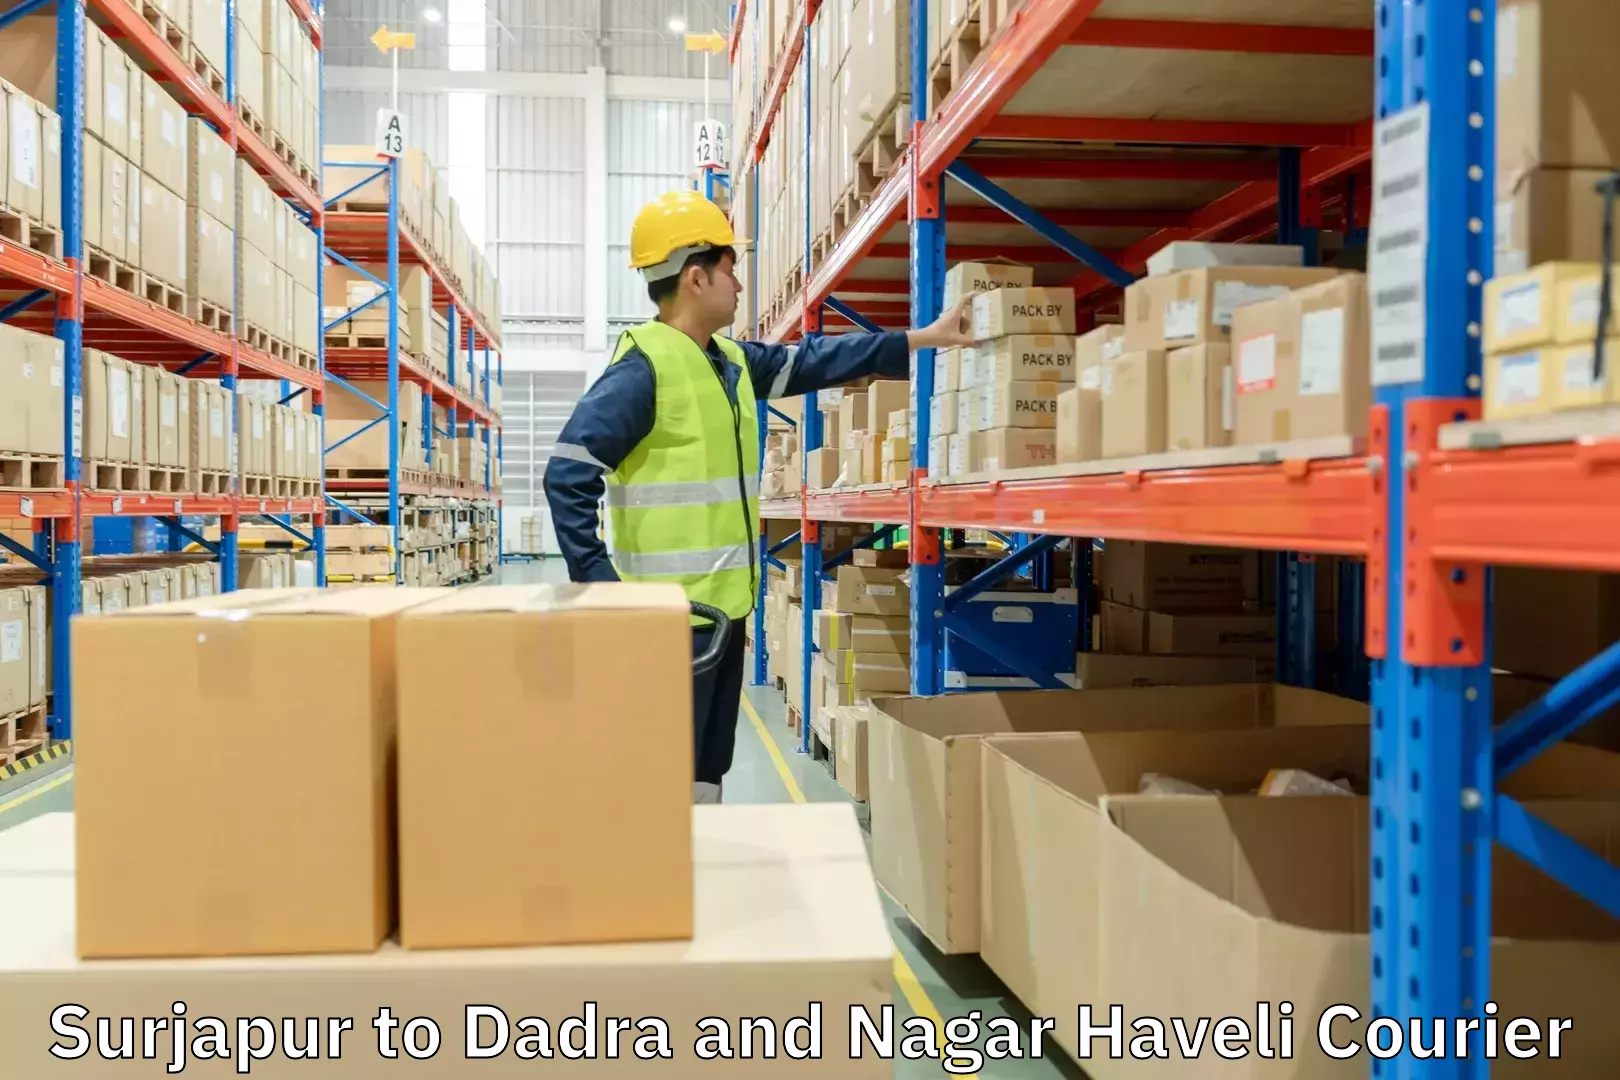 Scalable shipping solutions Surjapur to Dadra and Nagar Haveli